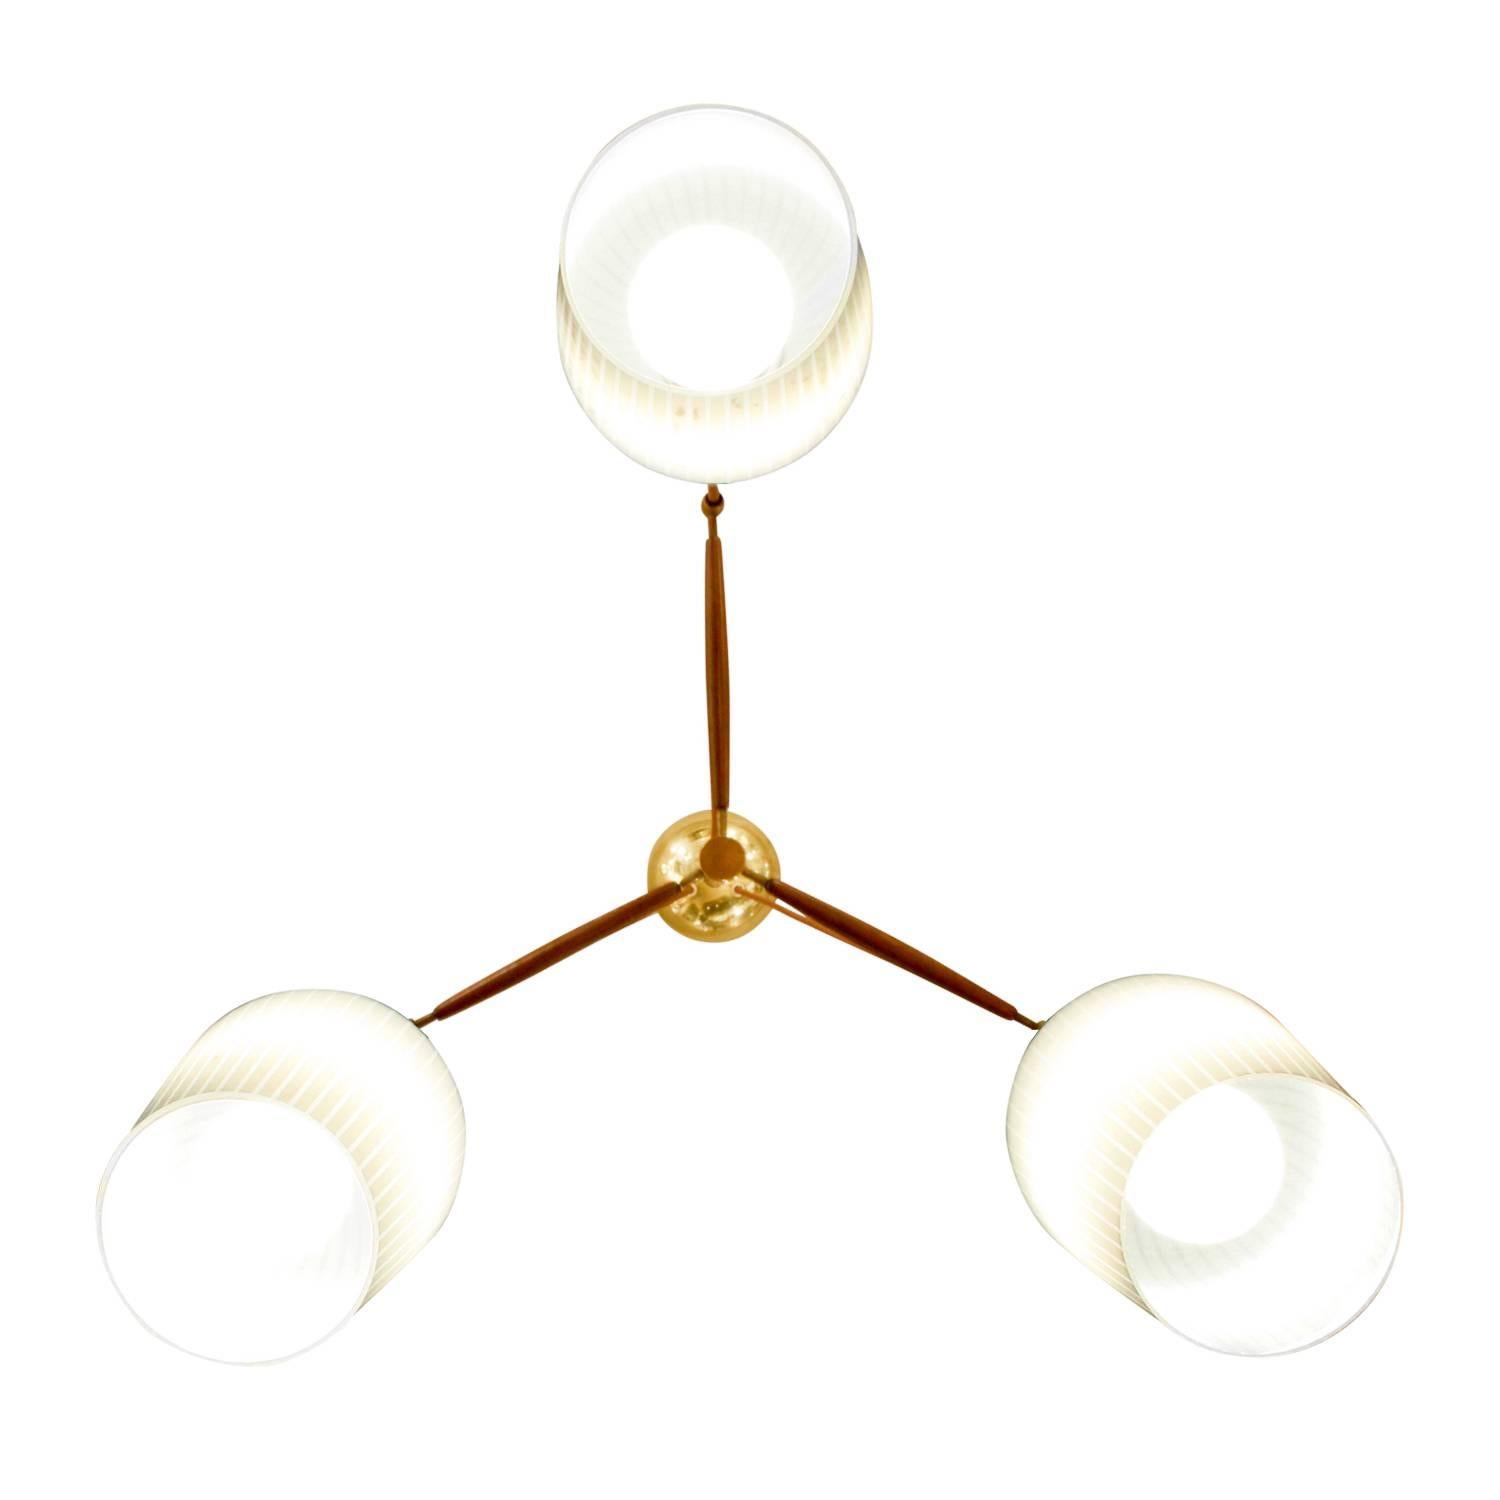 Chandelier with three hanging pin-striped milk glass shades with walnut armature and brass accents by Lightolier, American, 1950s. (Lightolier label on canopy). The drop can be modified to spec.